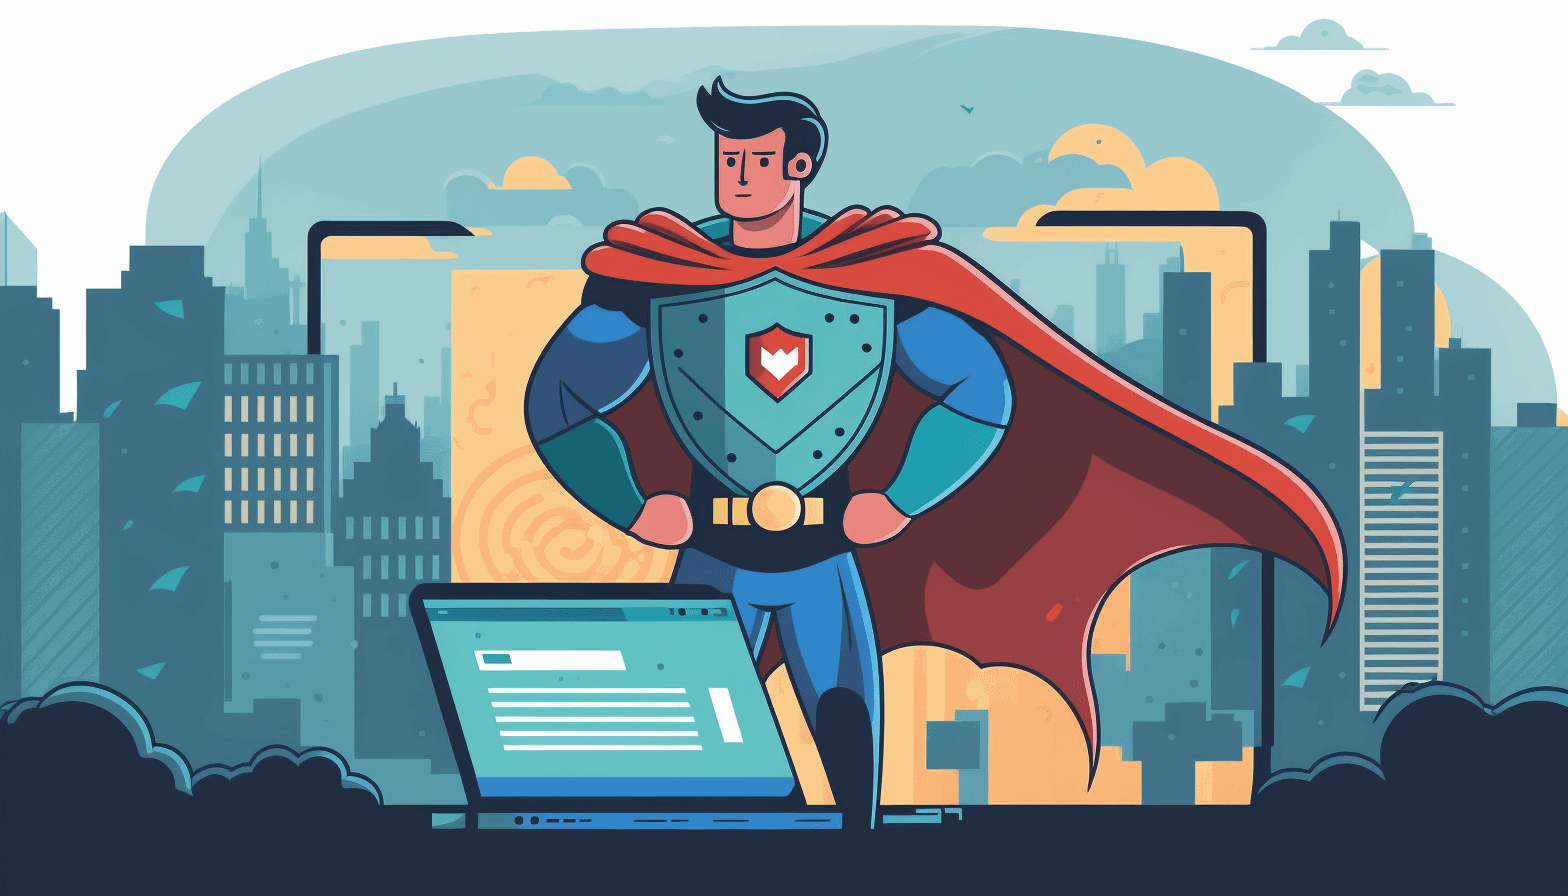 A cartoon image of a web developer wearing a superhero cape and holding a shield. The shield is protecting a laptop with a web application interface on the screen.